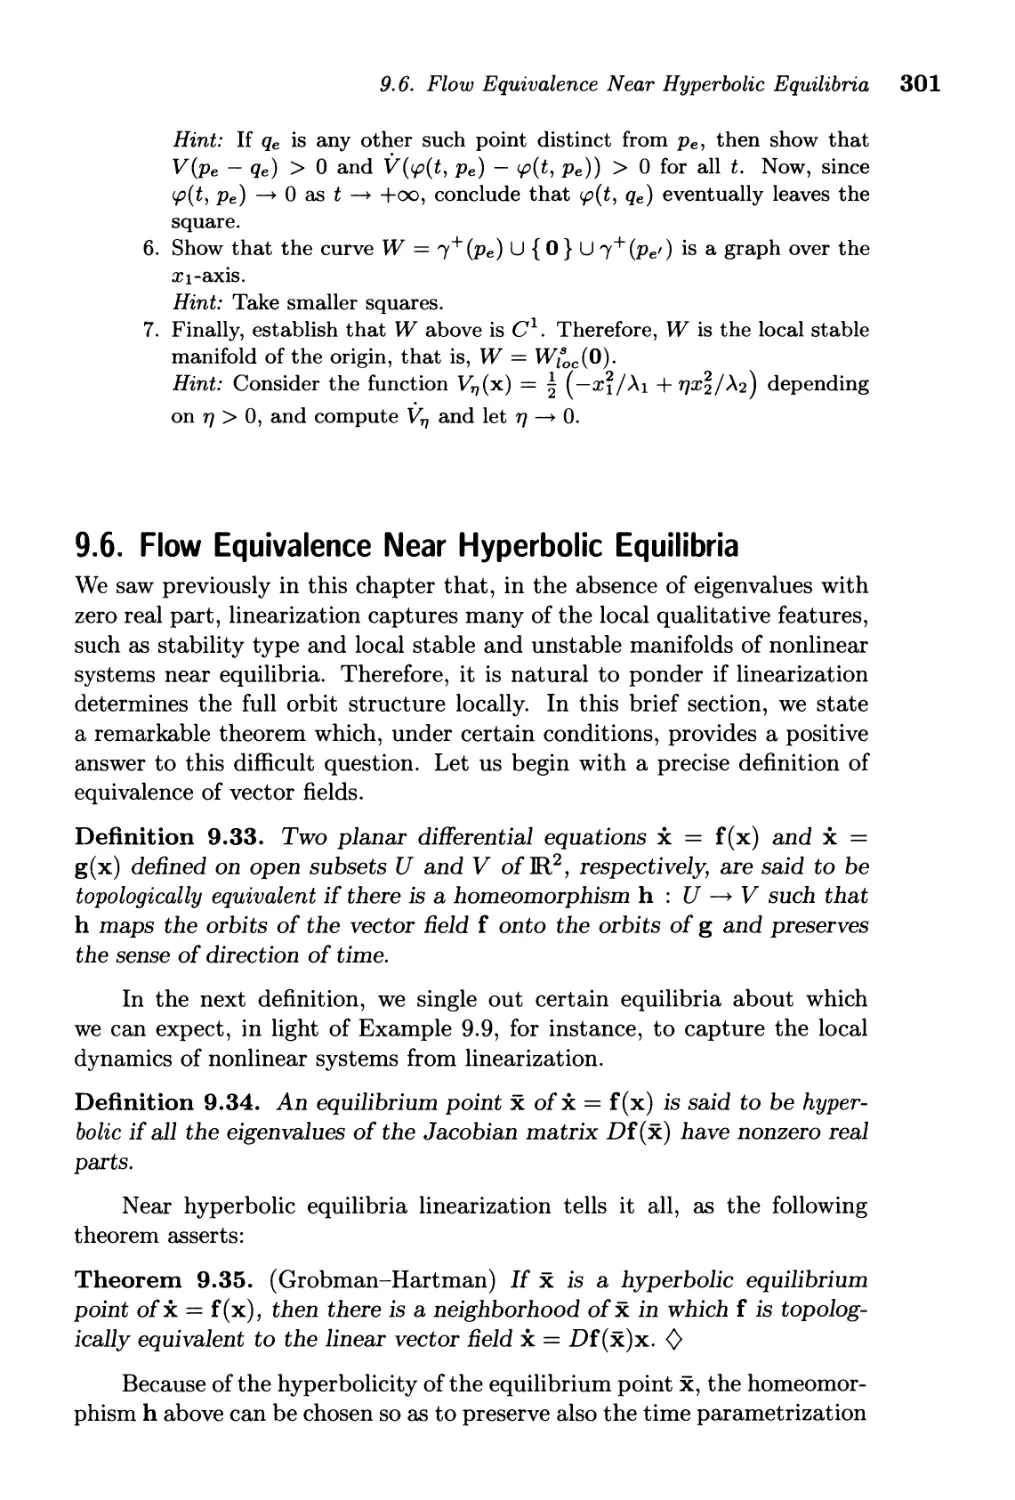 9.6. Flow Equivalence Near Hyperbolic Equilibria